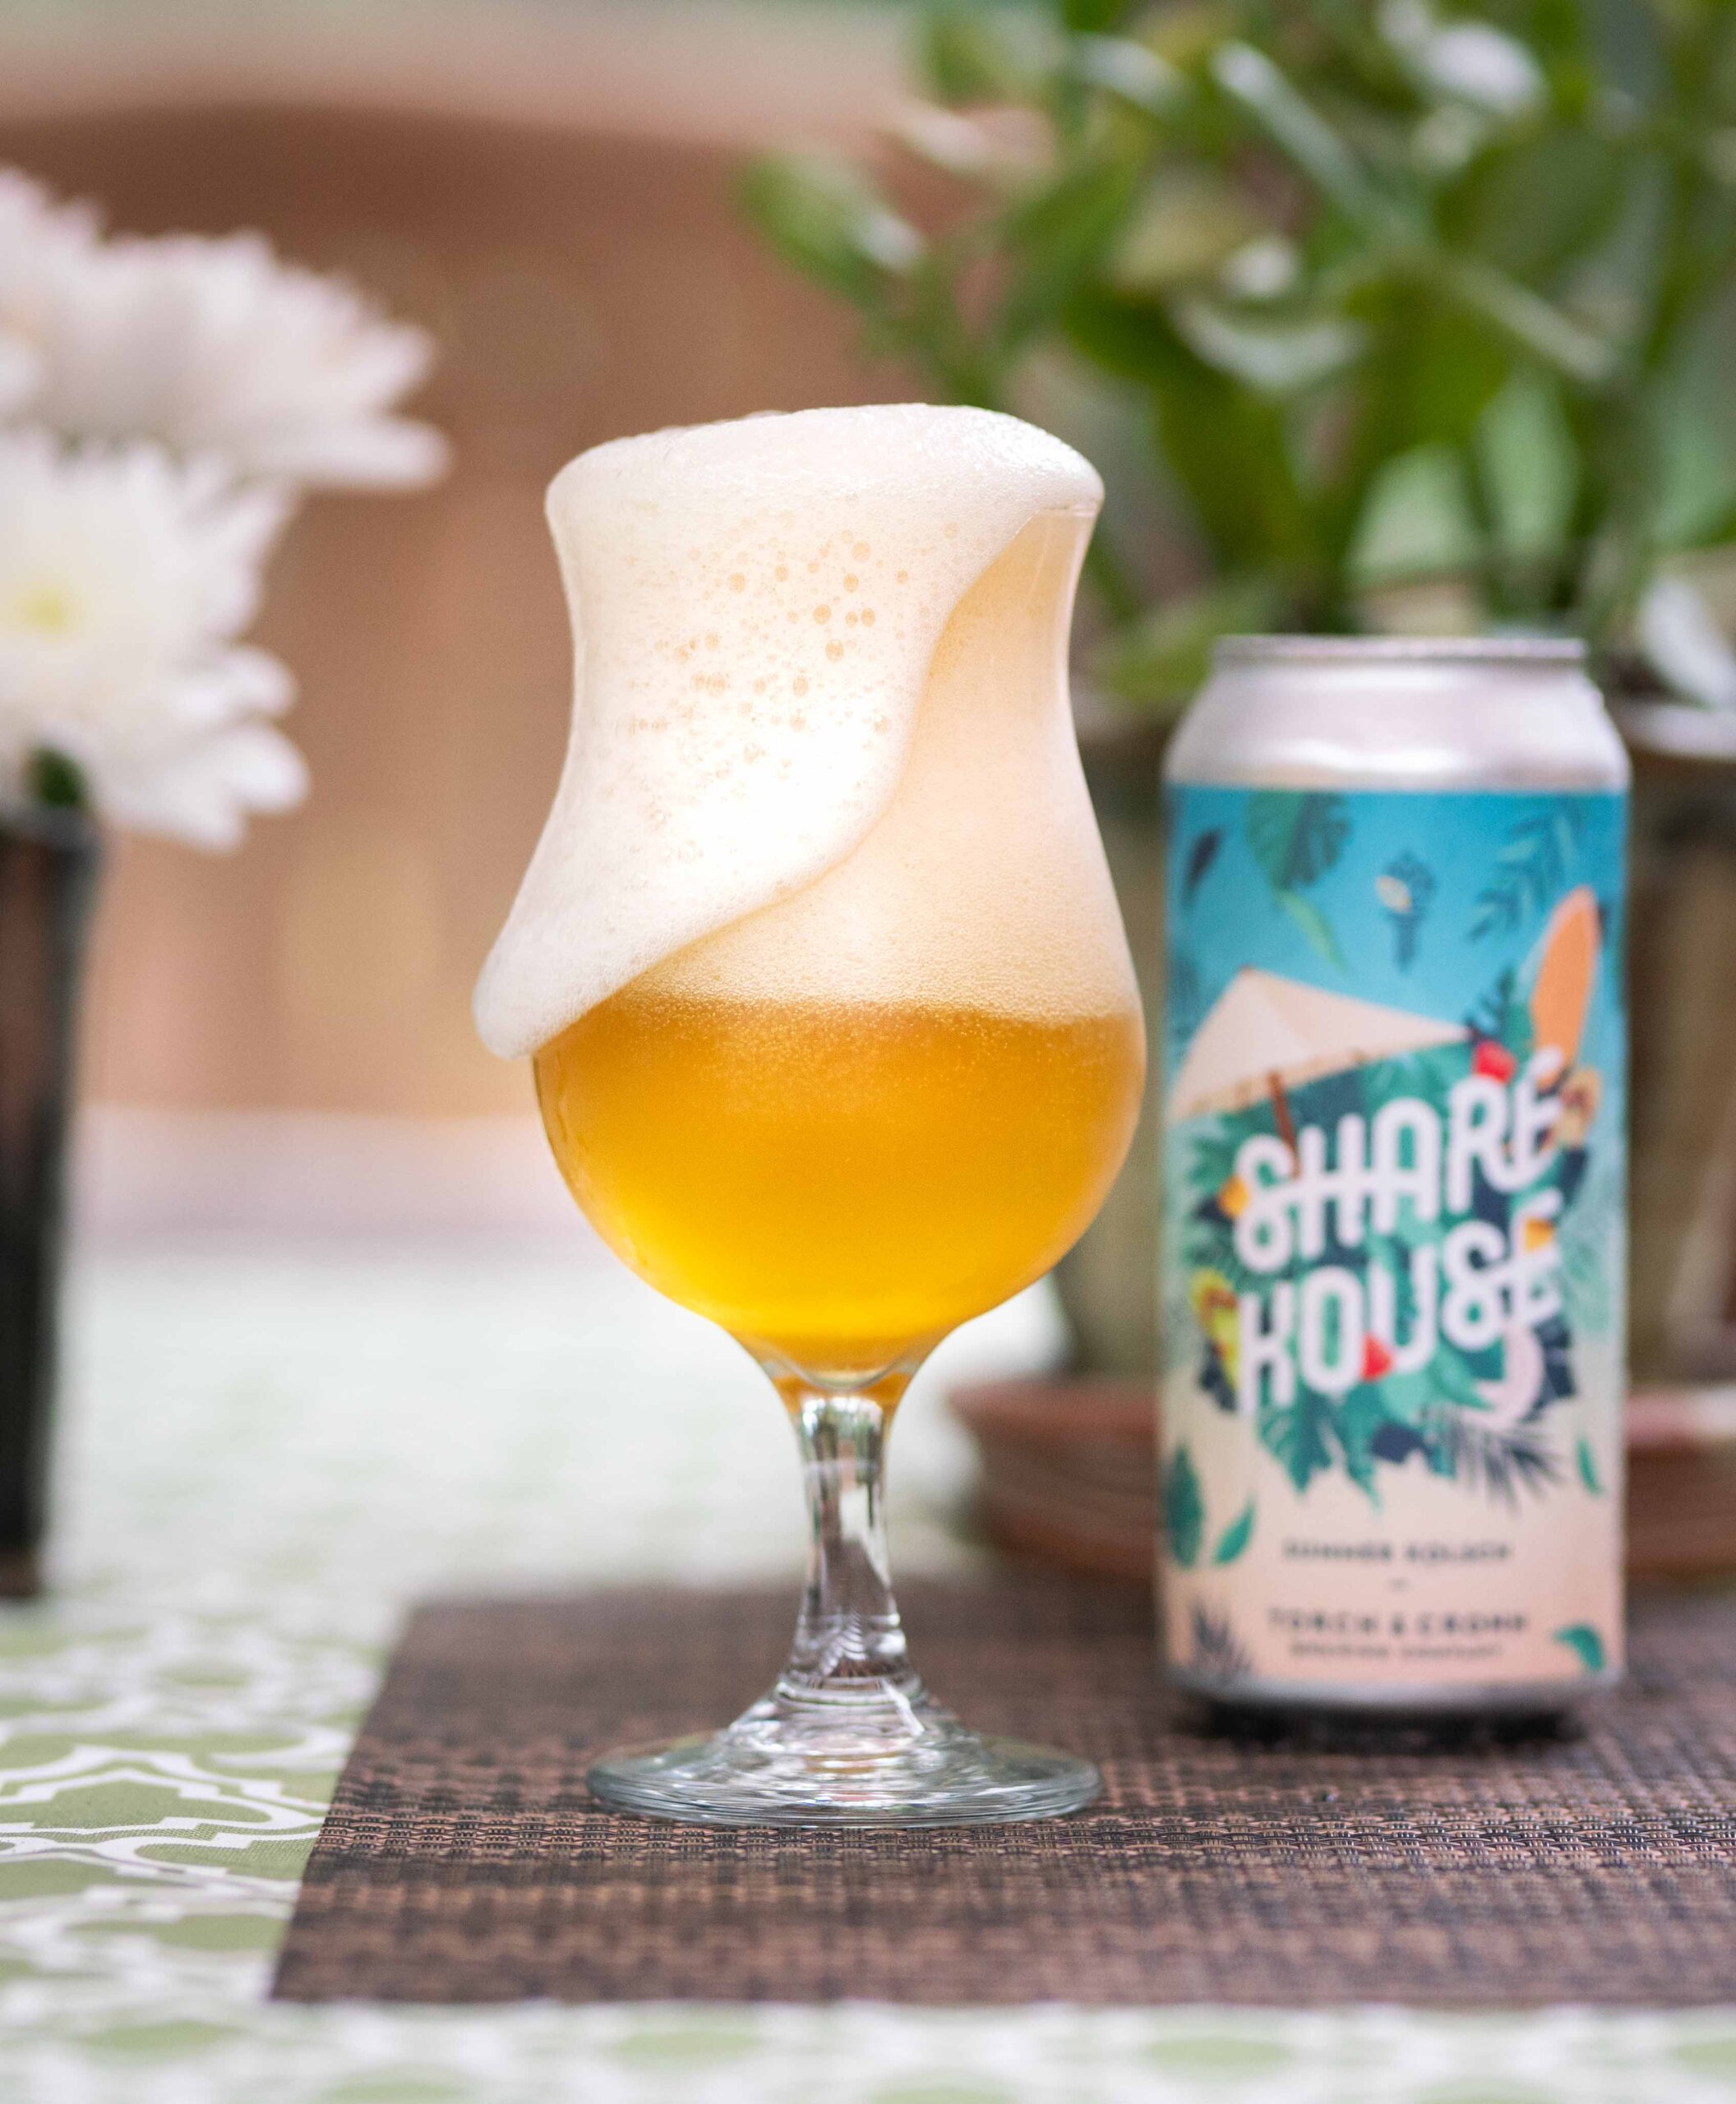 Share House from Torch & Crown Brewing